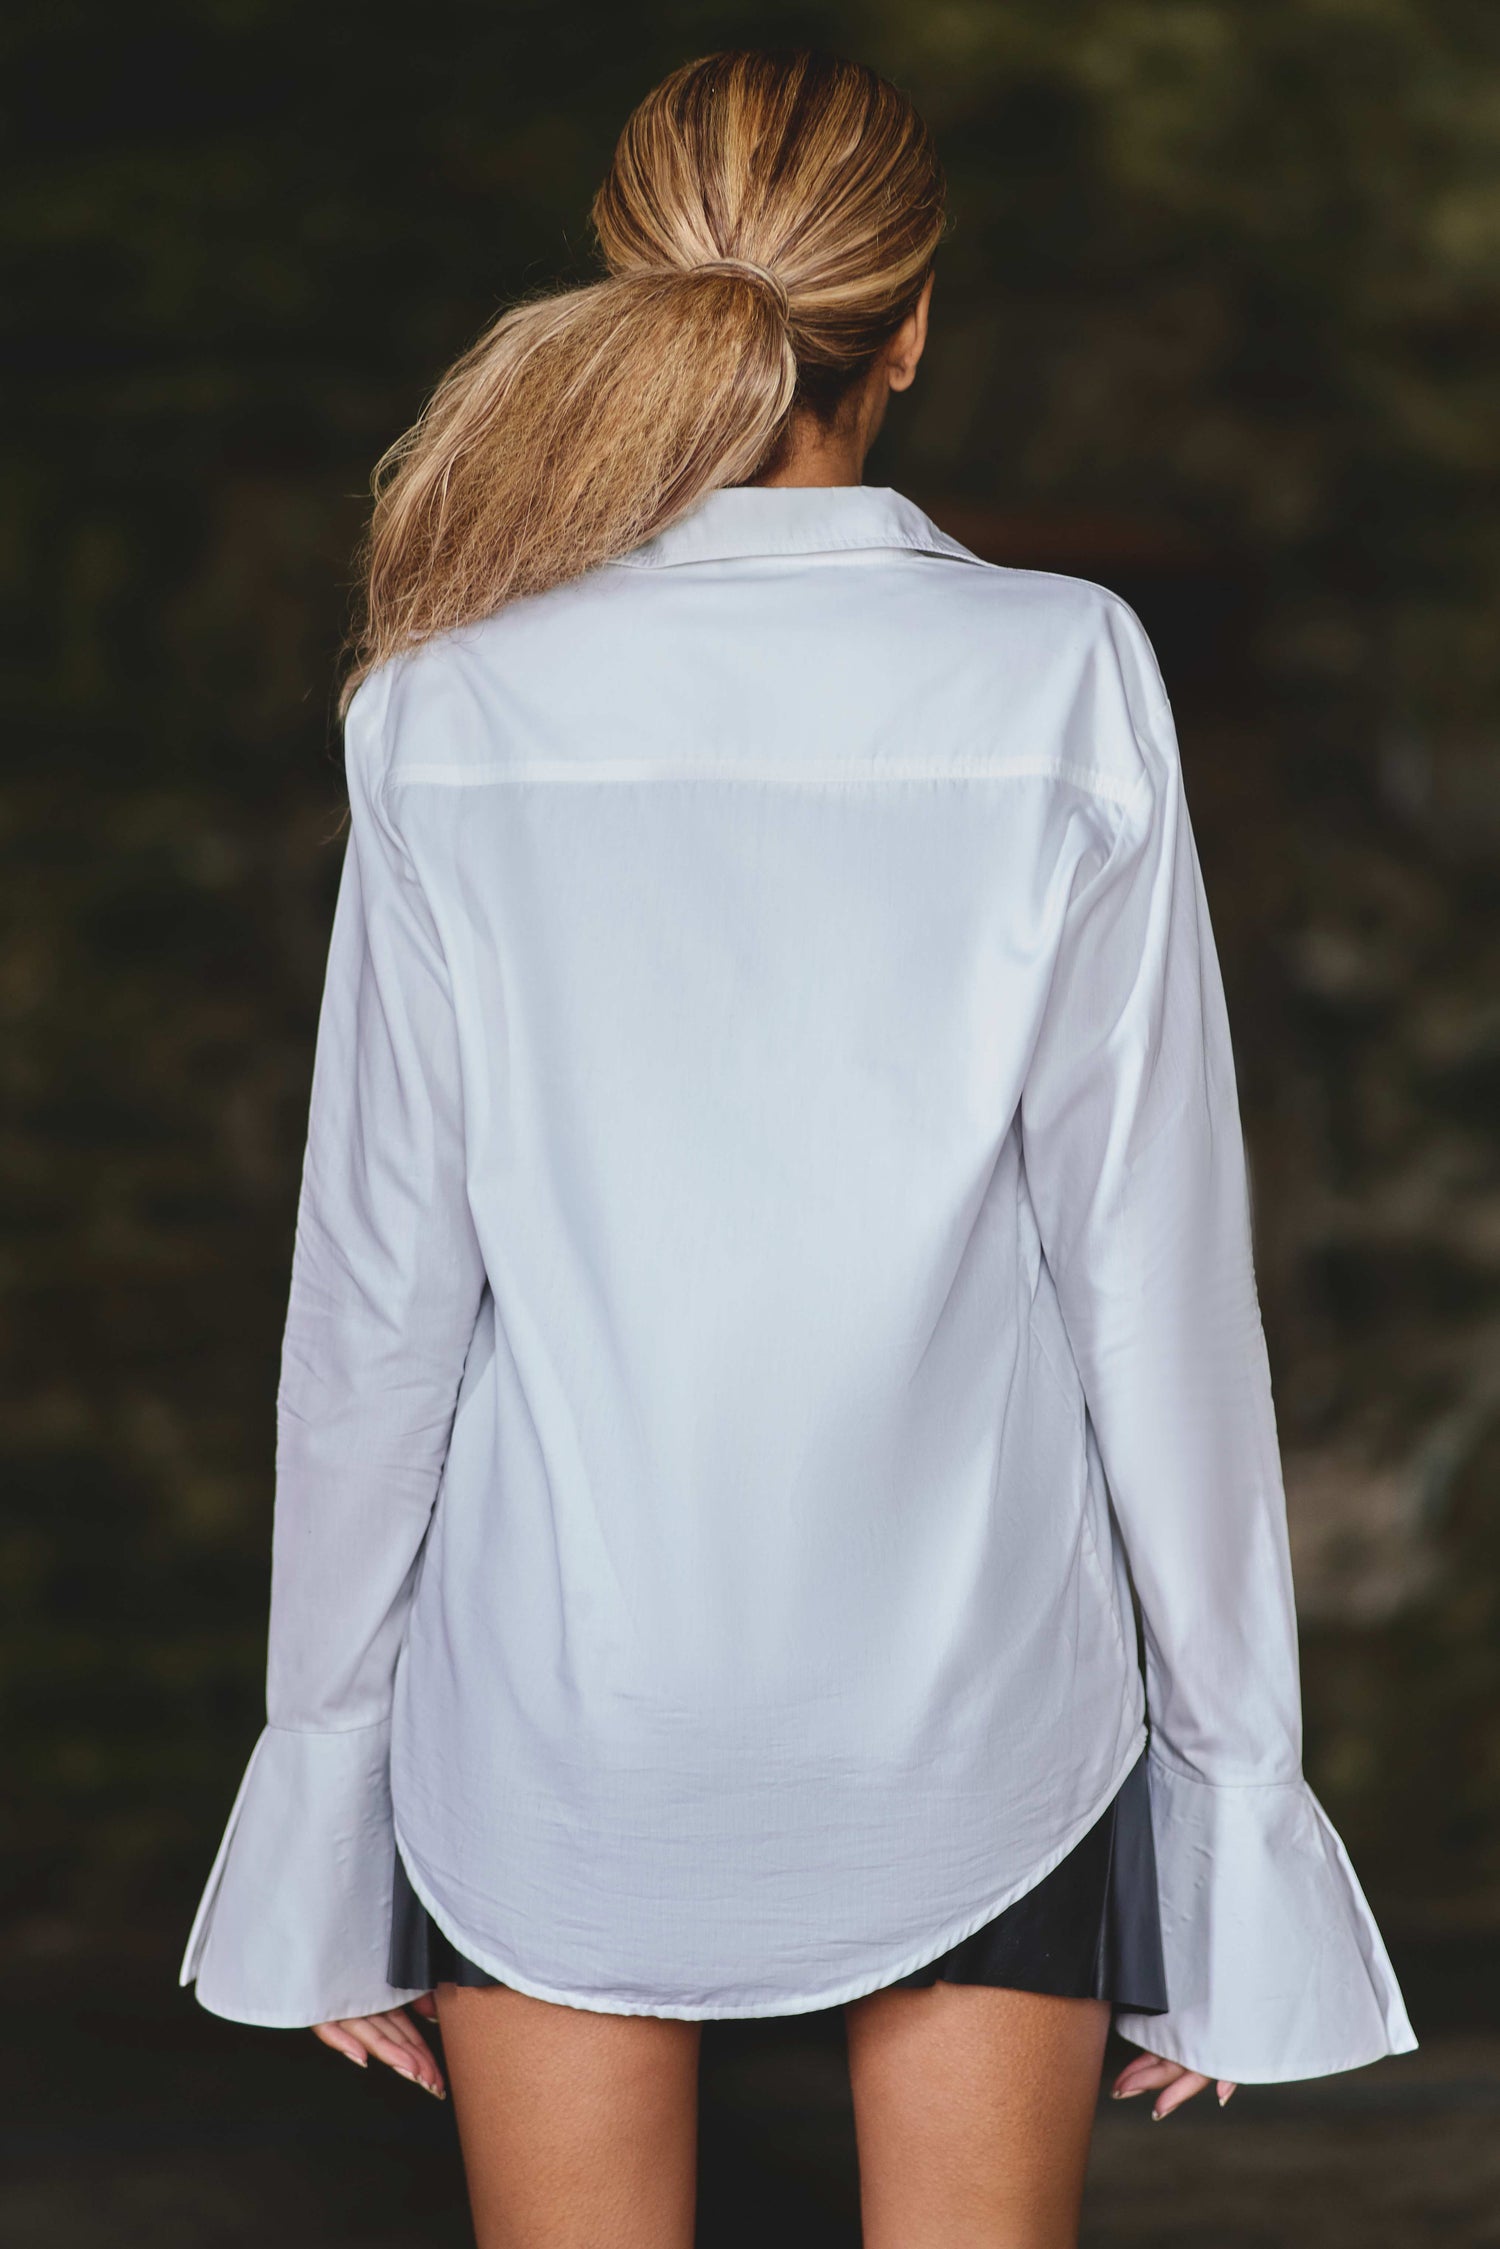 back view of model wearing luxury white shirt with large cuffs